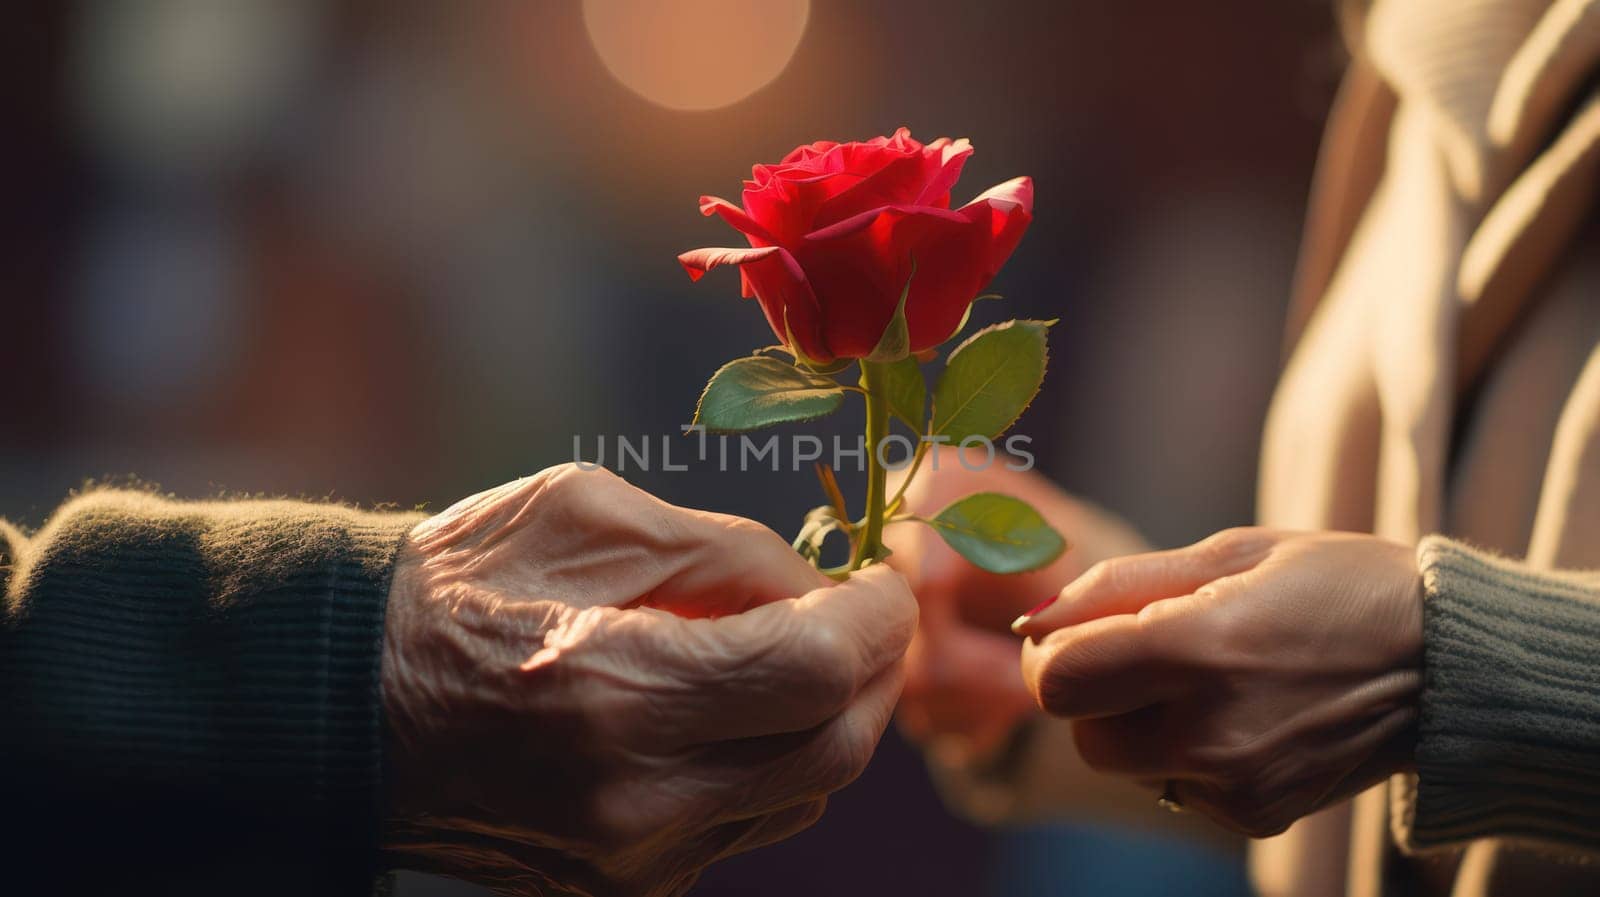 Beauty in Blooms: A Red Rose Symbolizes Love and Care, Held in the Hands of a Young Woman, Surrounded by a White Floral Bouquet